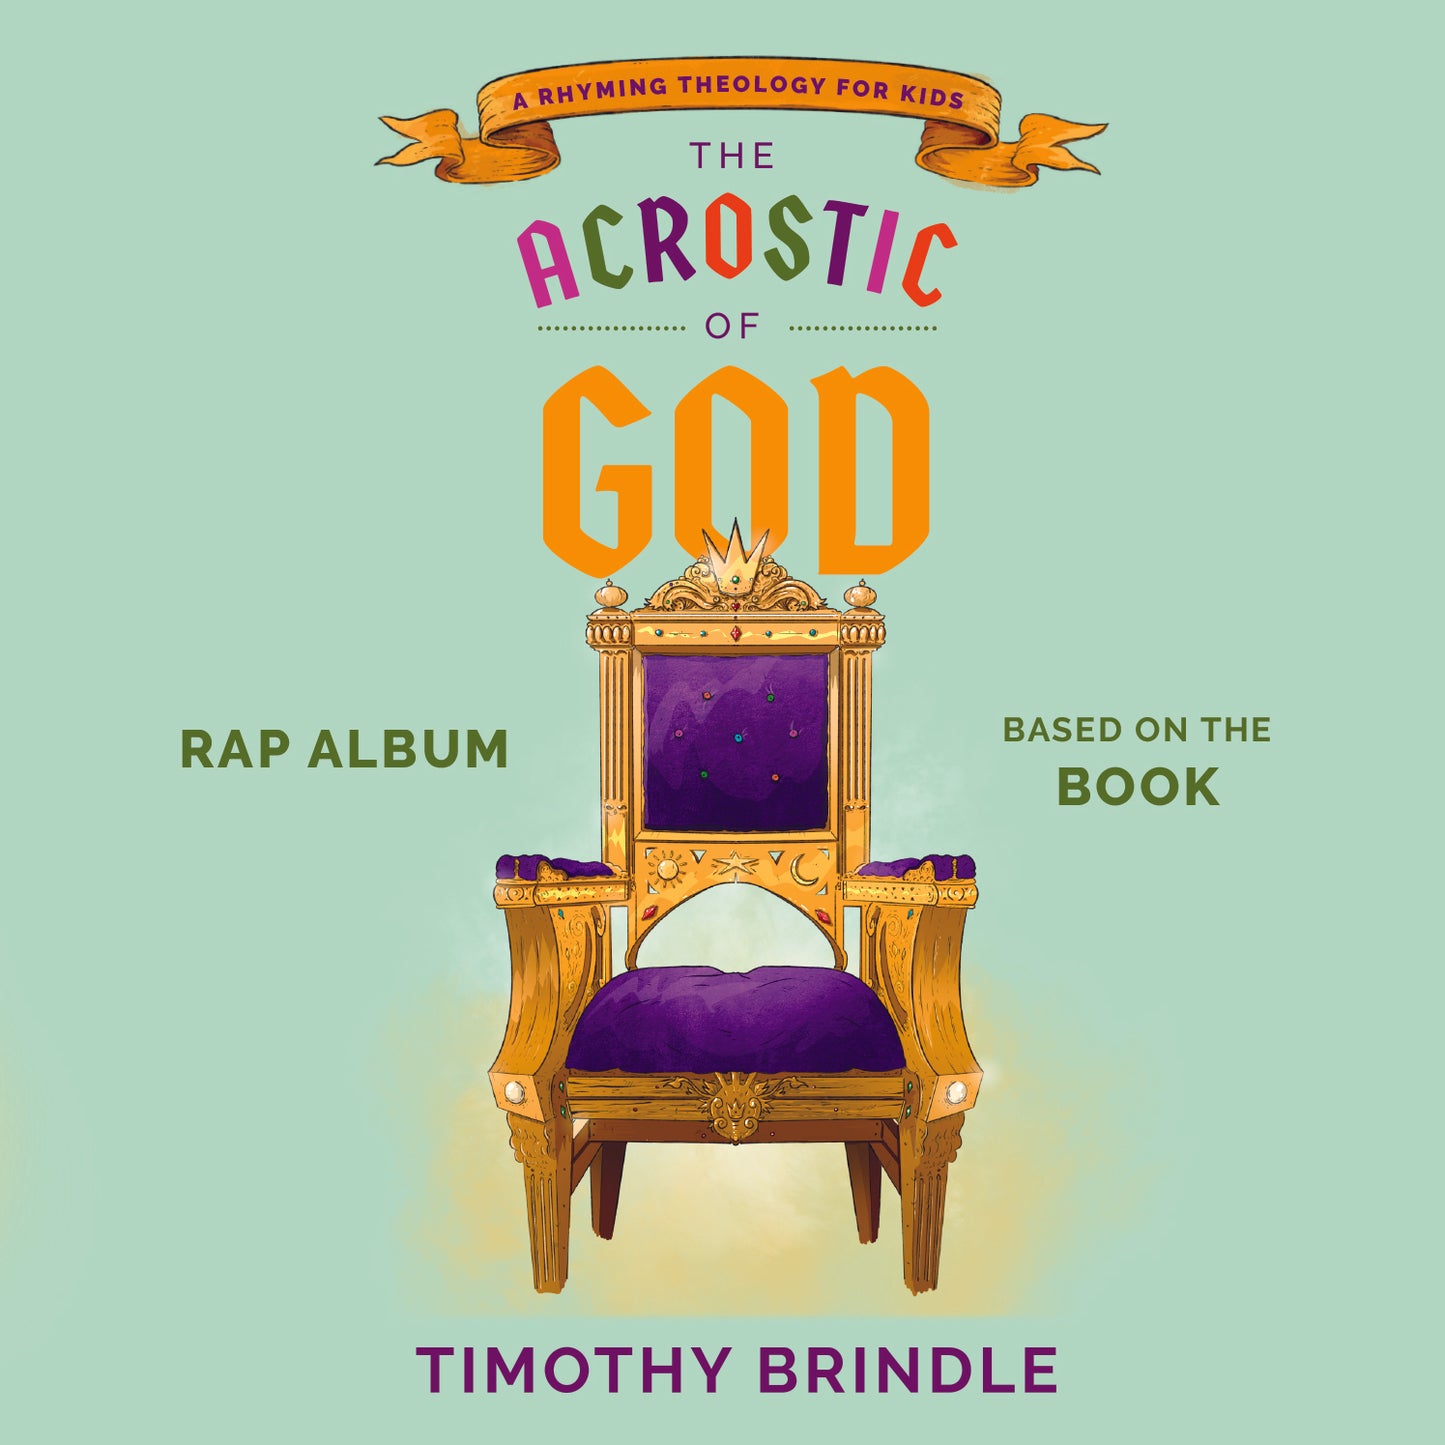 The Acrostic of God: A Rhyming Theology for Kids (Digital Album)